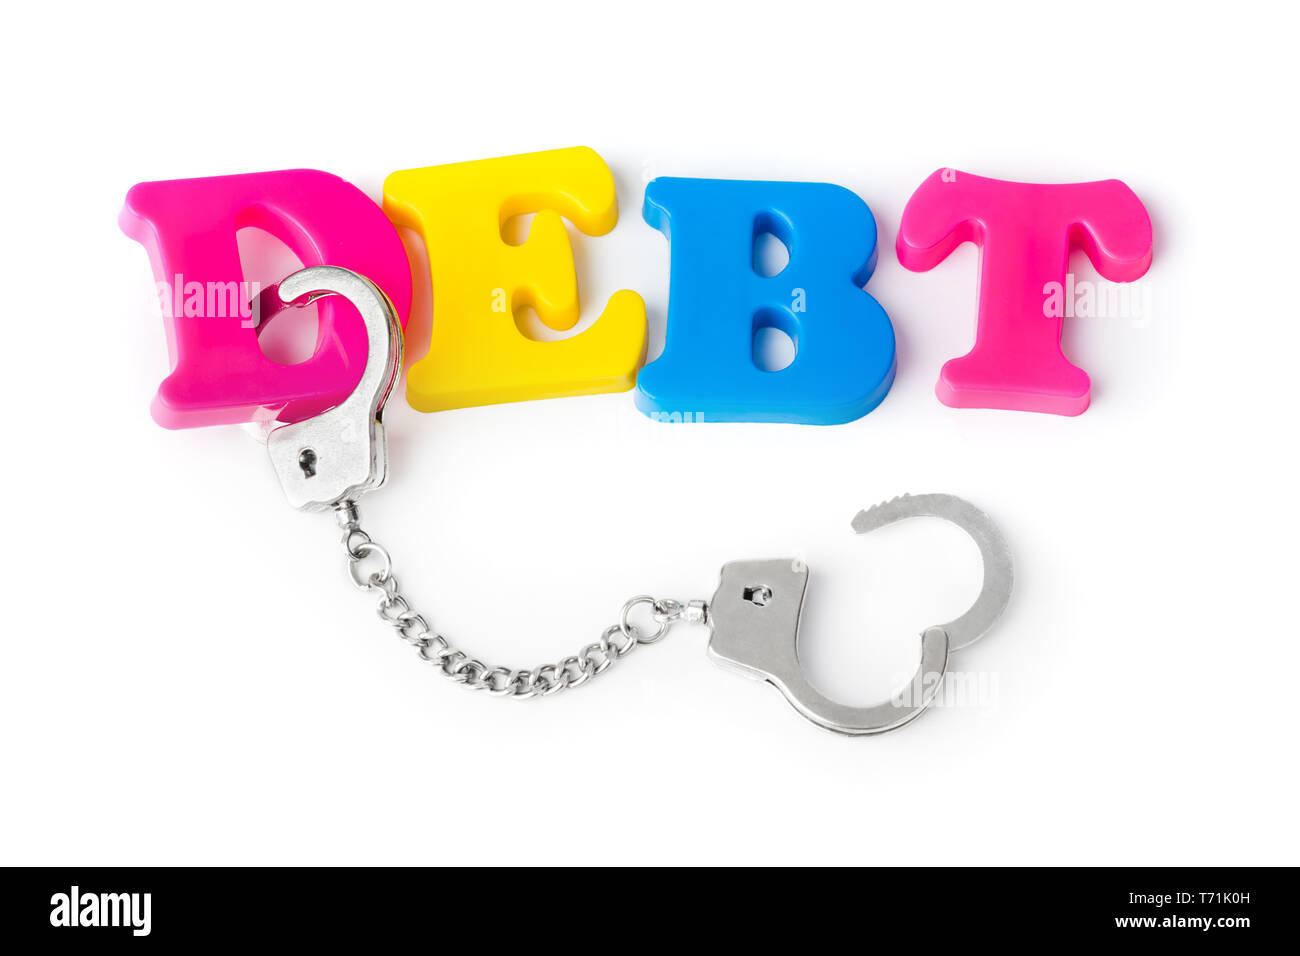 Debt and handcuffs Stock Photo